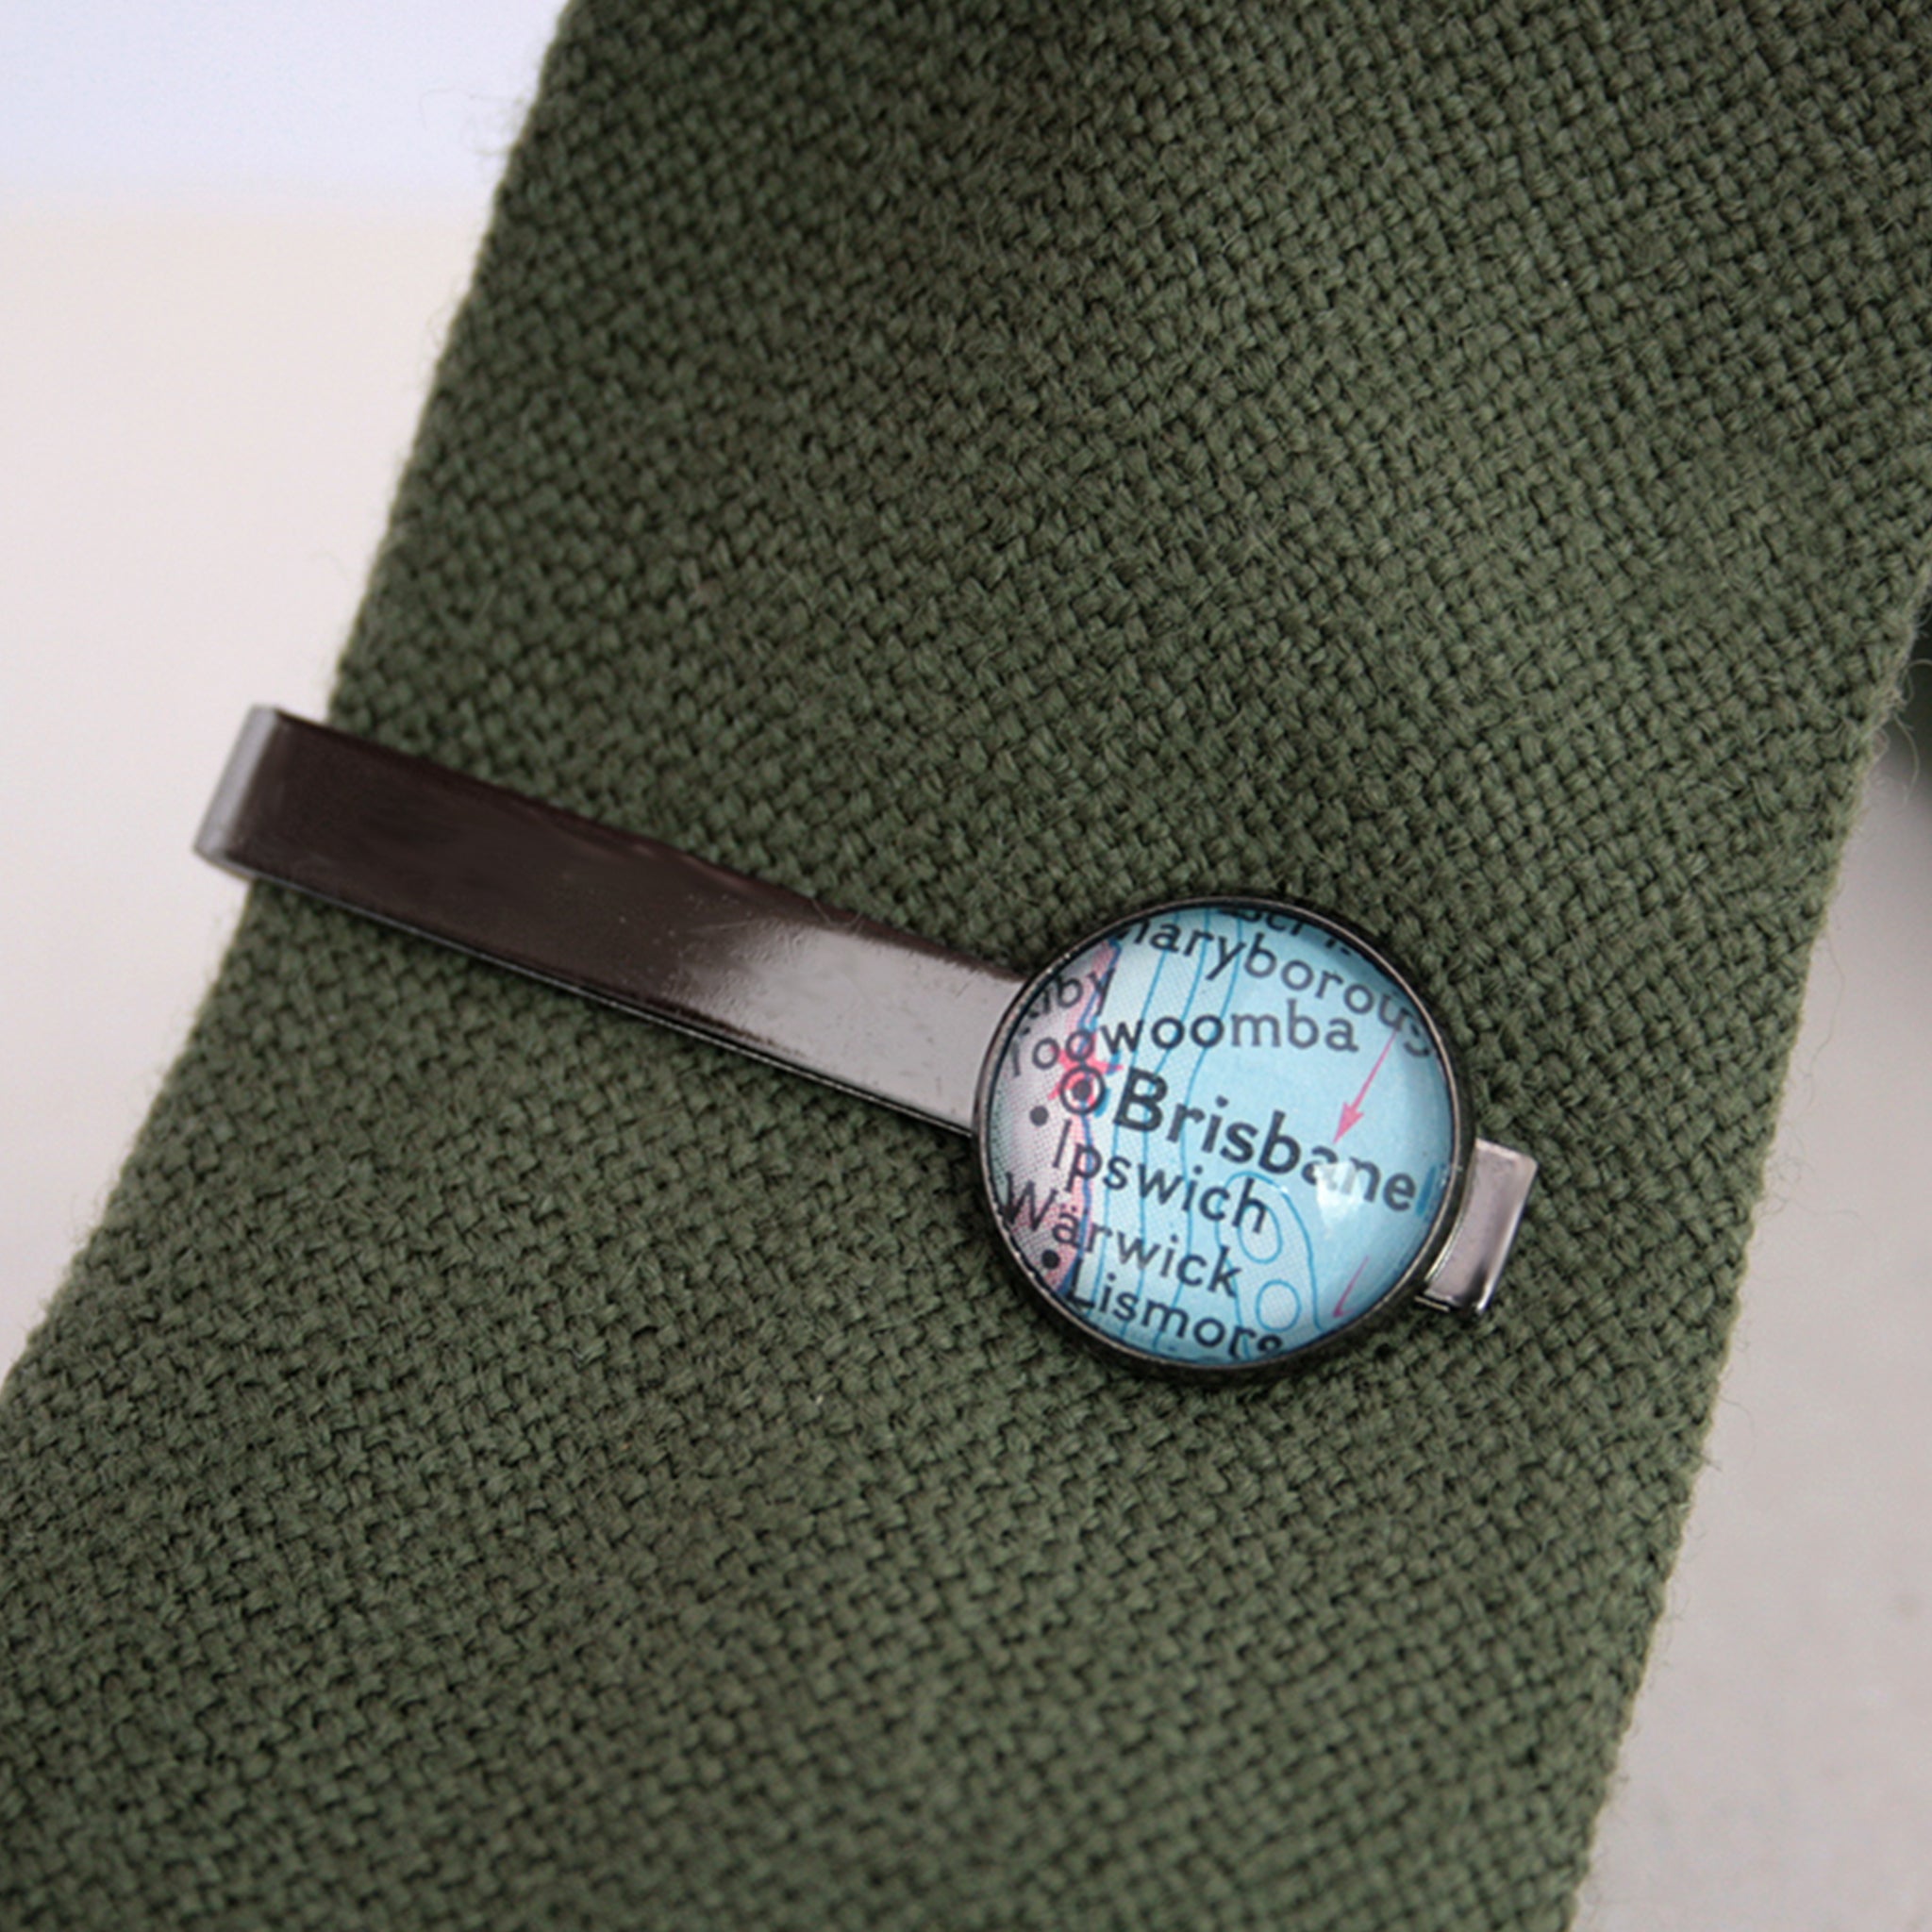 Tie clip in gunmetal black color featuring map of Brisbane on a green tie 